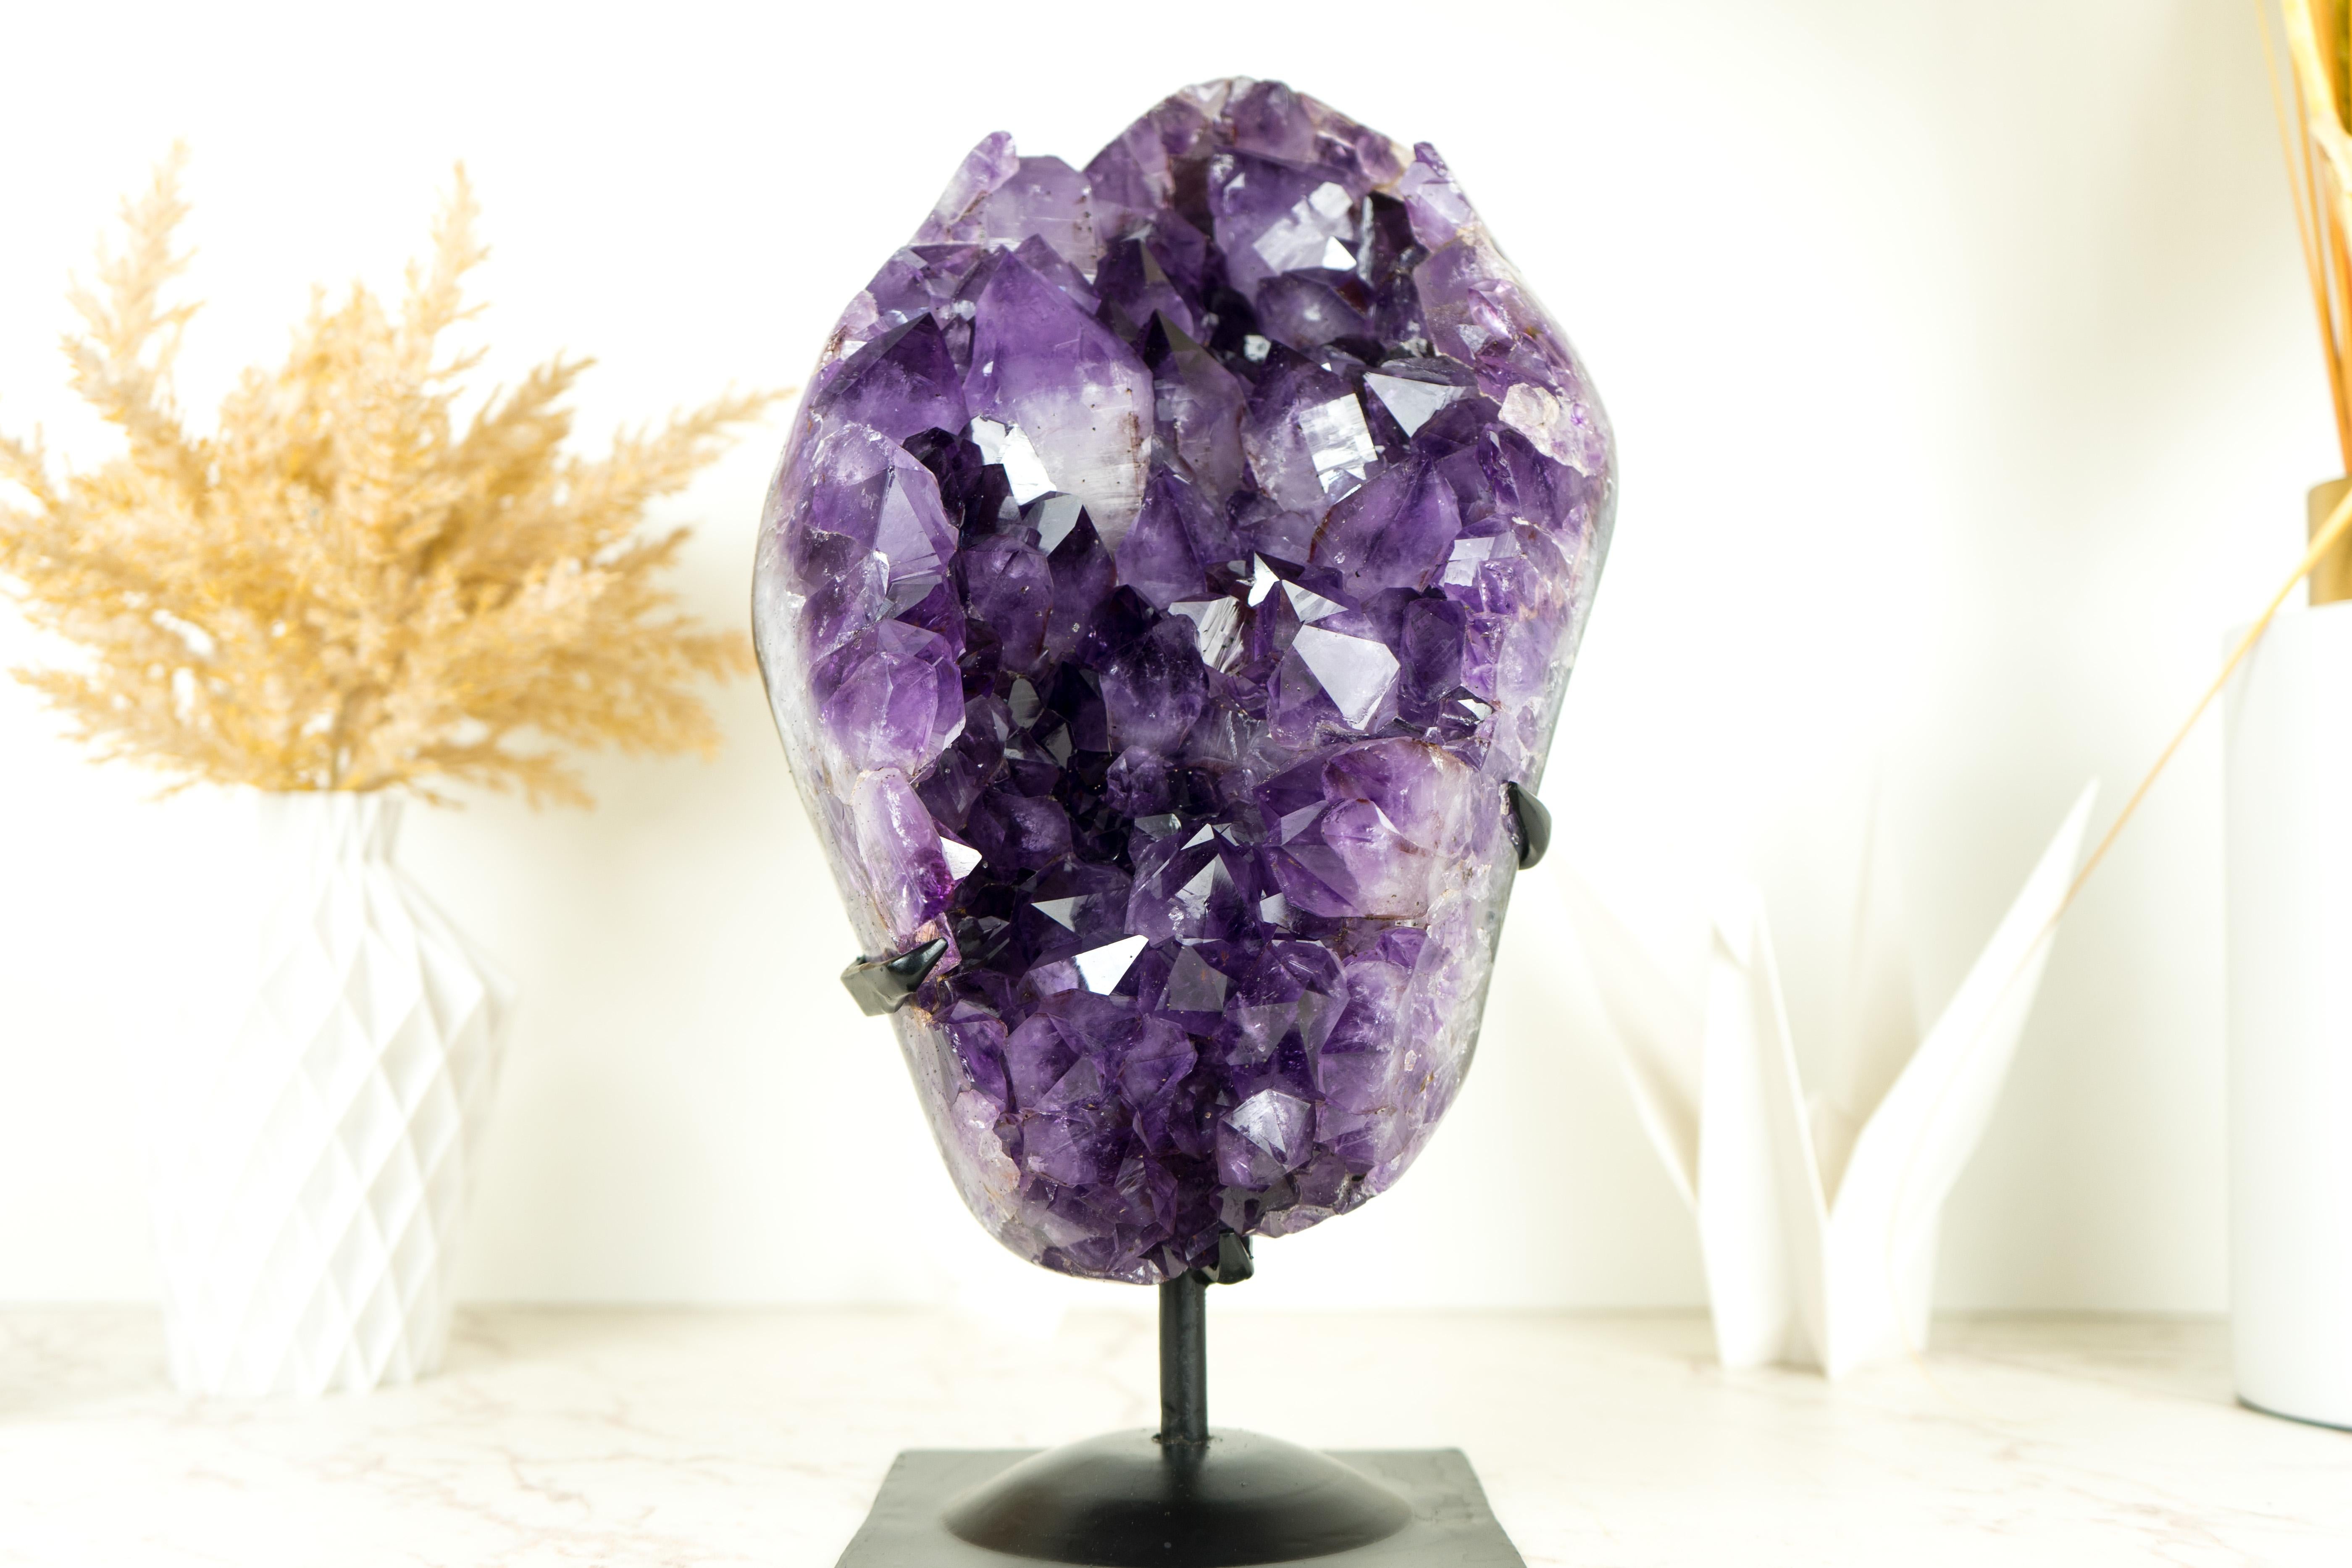 Beautifully formed, with large and unique grown Amethyst Points, this Amethyst cluster delights us with its deep dark tone of purple and the many shiny, intact, beautifully formed Amethyst Points. A centerpiece to adorn a world-class crystal